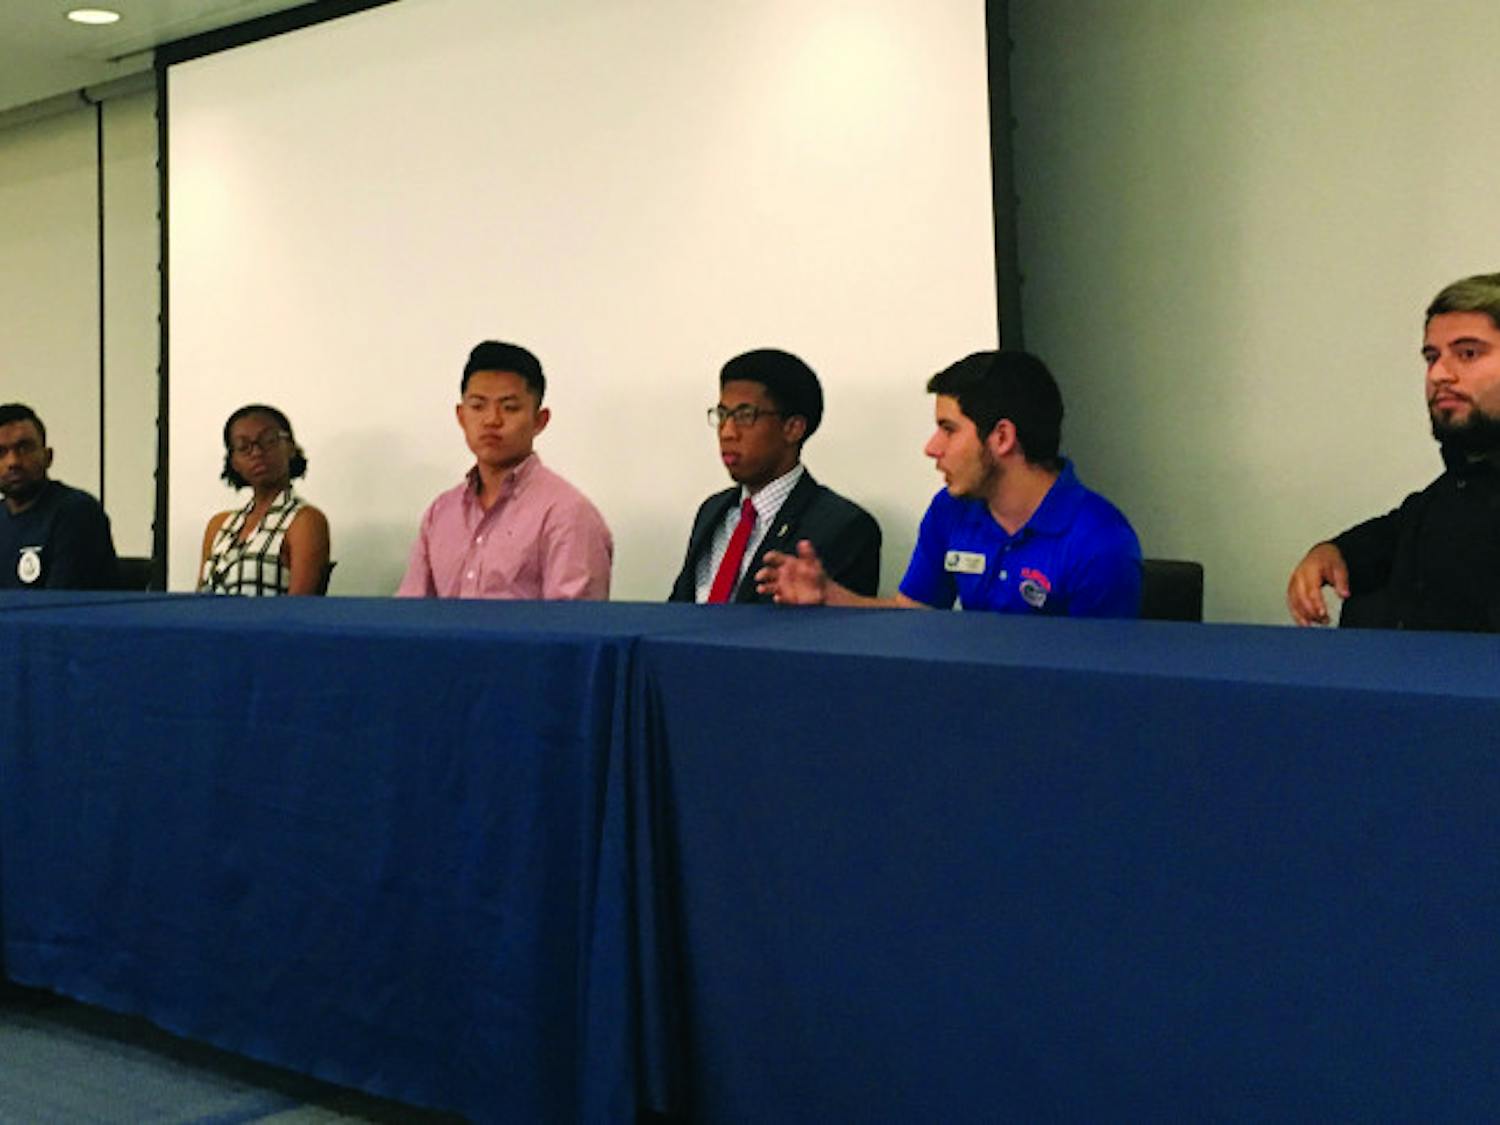 From Left: Analesa Clarke, Ronit Dastidar, Nyasha Joseph, John Kim, Ian Green, Robert Lemus and Alex Chaves discuss mental health in a panel on Tuesday. The event was during the first day of Student Government's annual Mental Health Awareness Week.